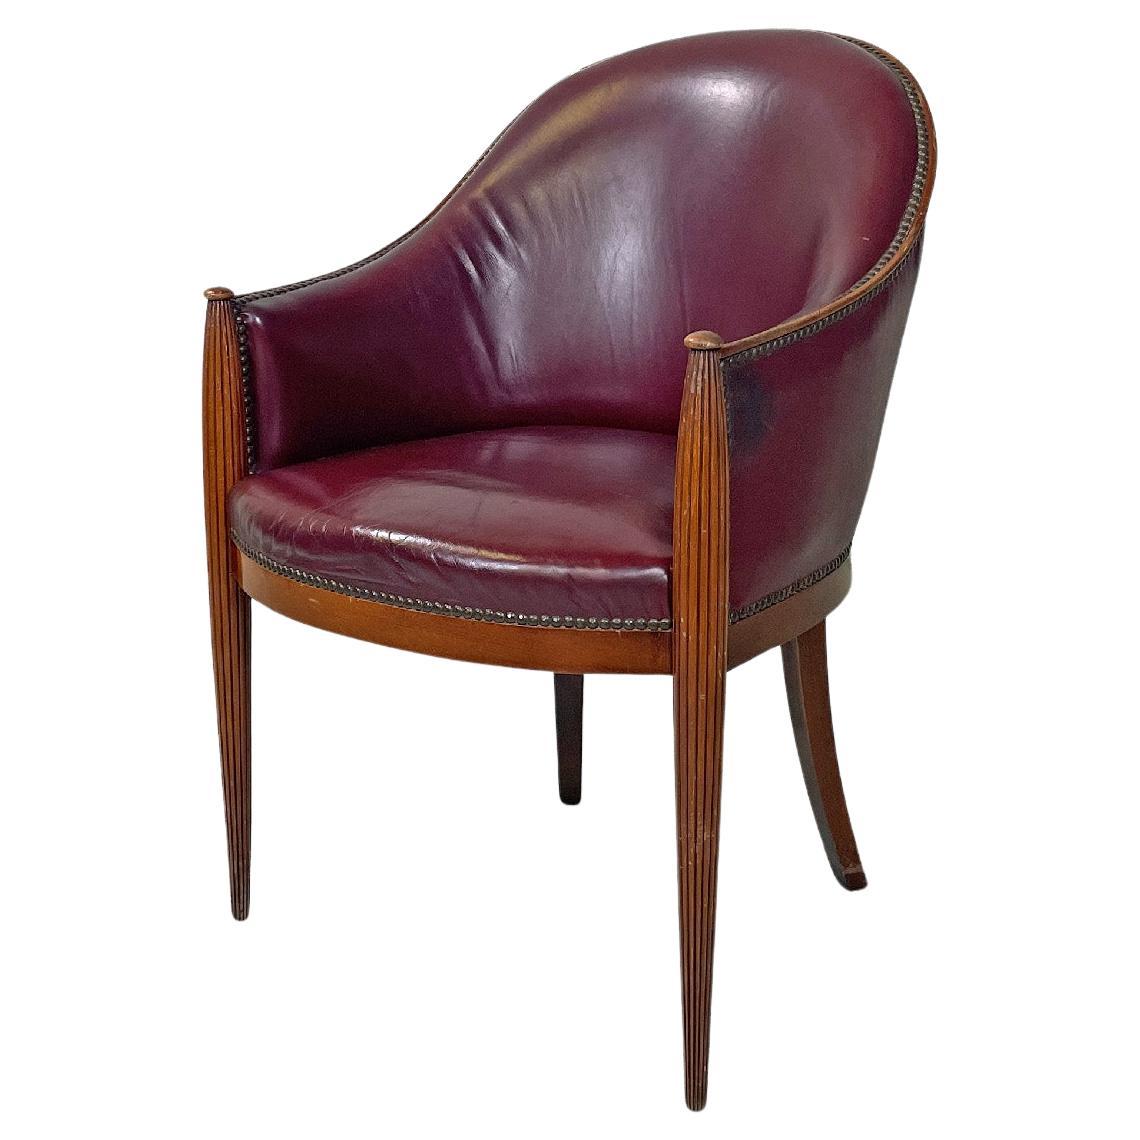 Italian mid-century modern wine-colored leather armchair with studs, 1950s For Sale